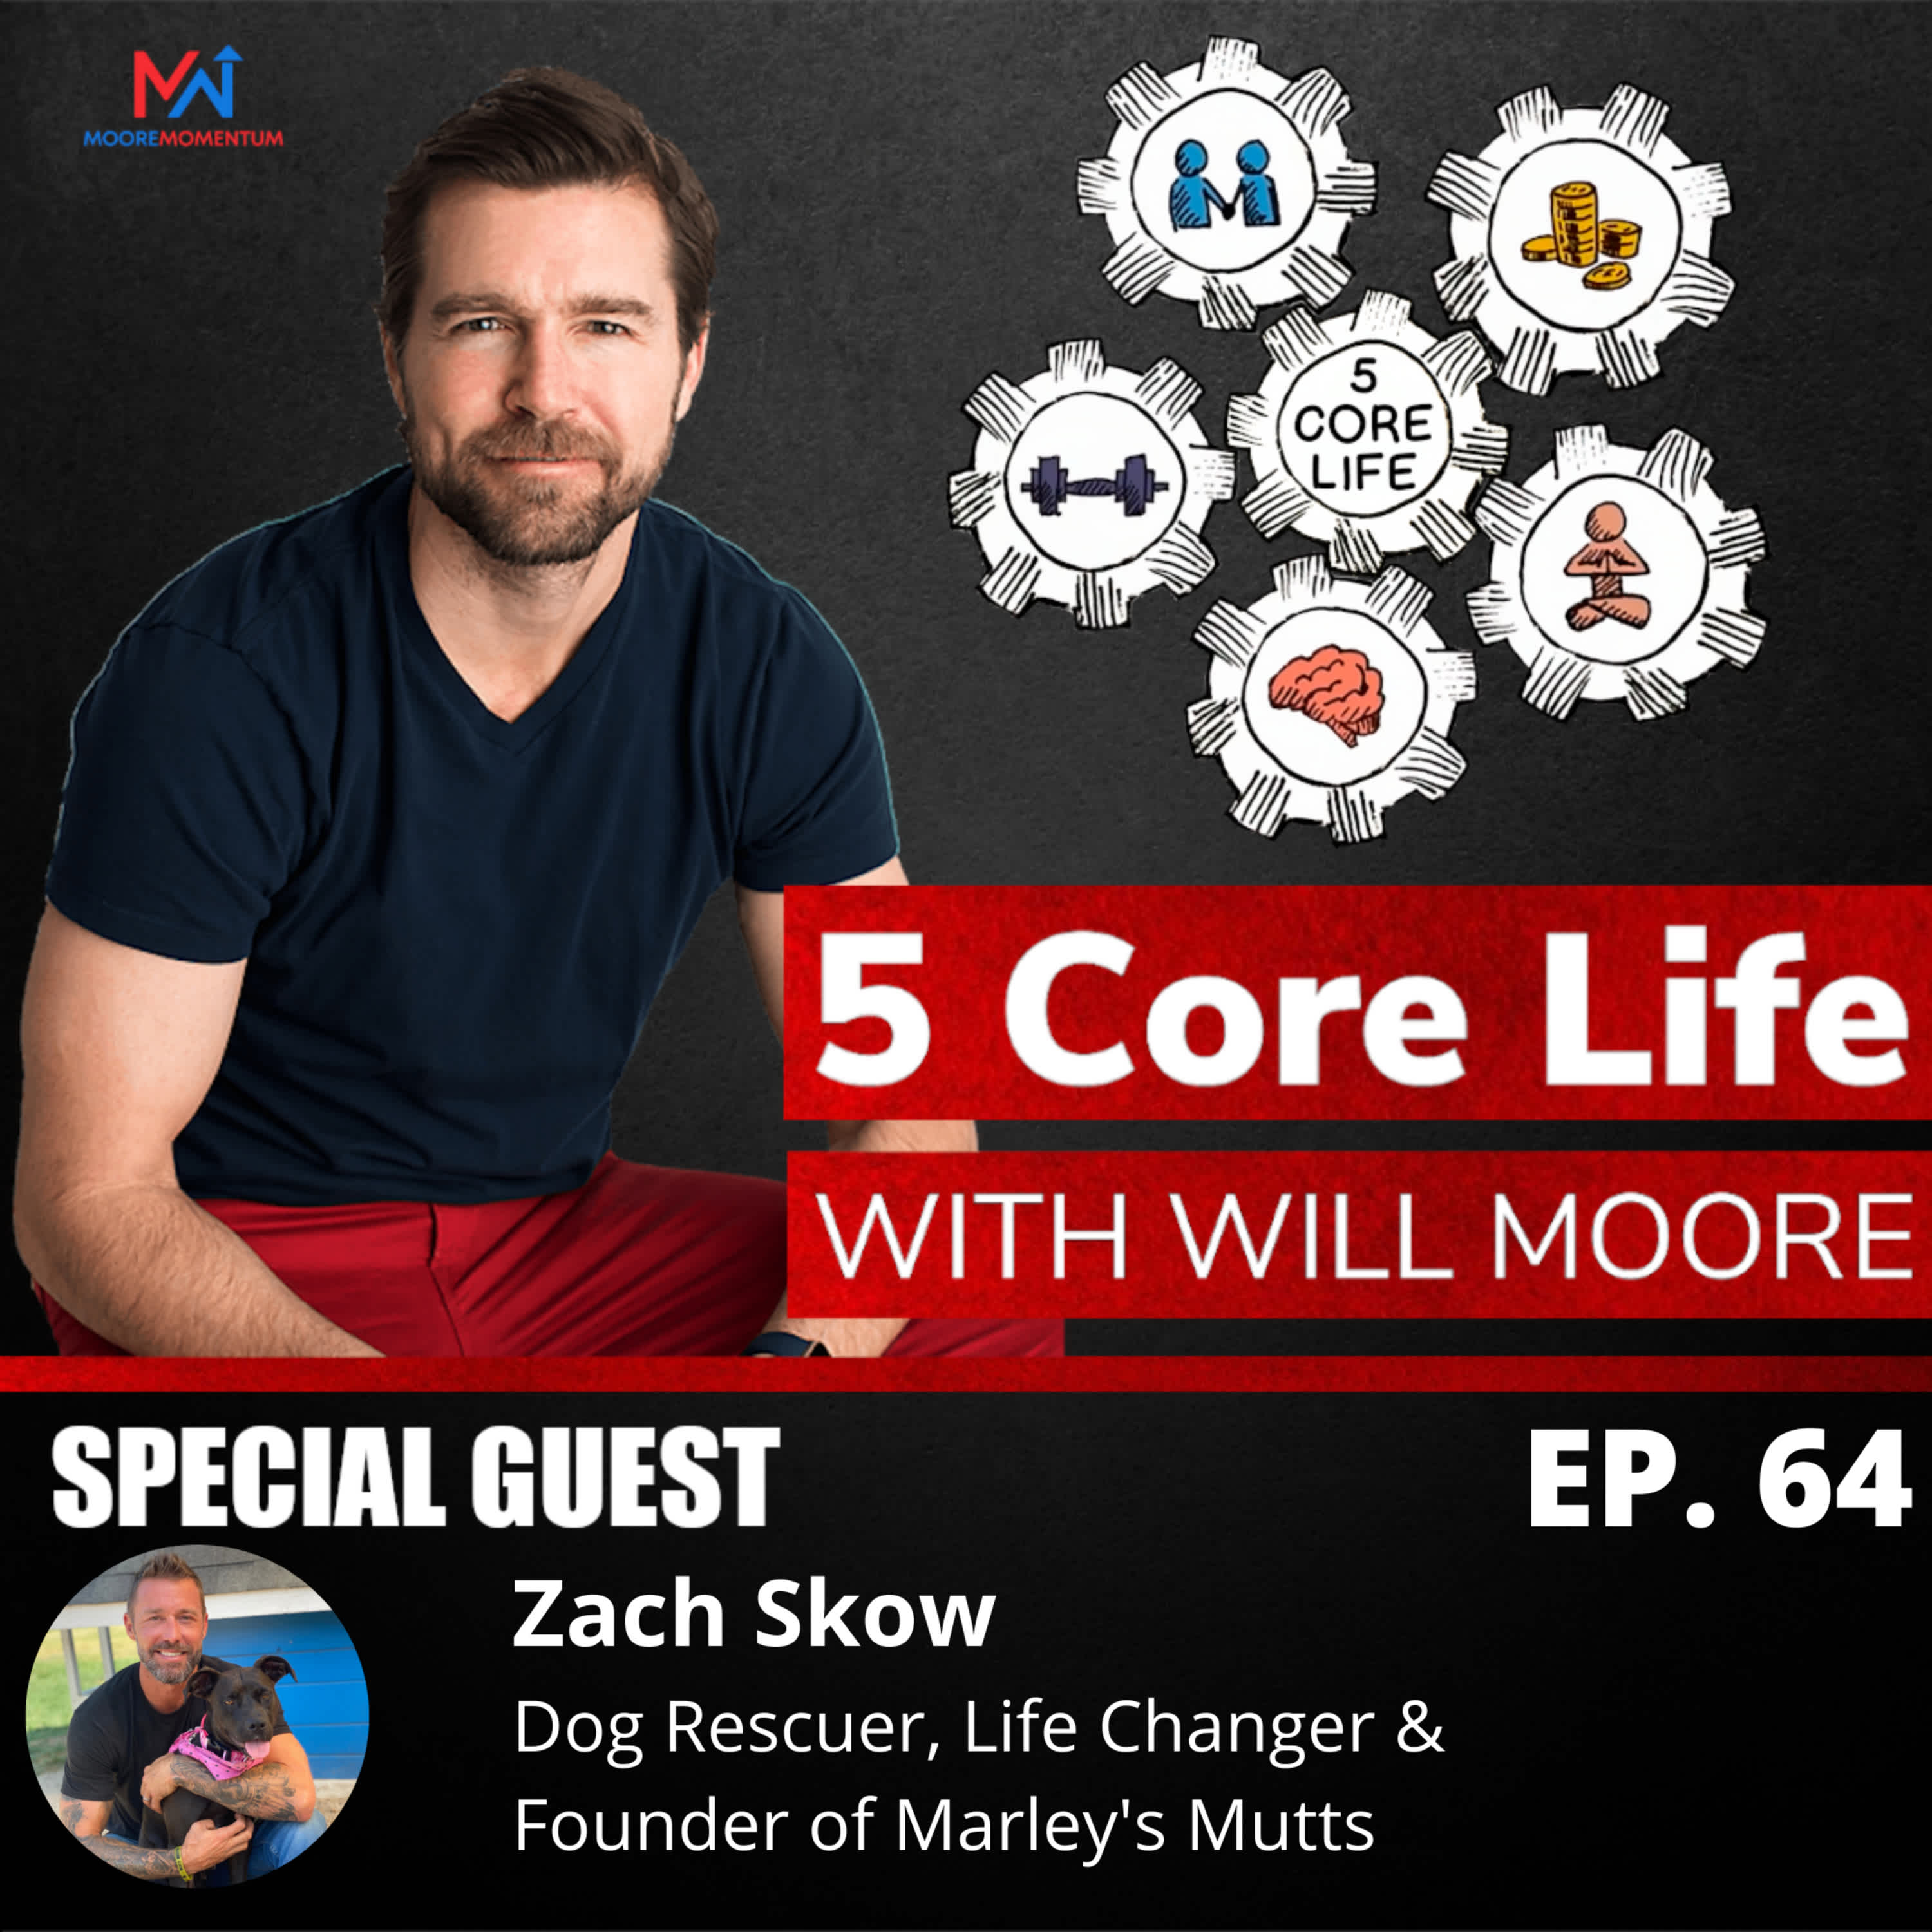 A Philosophy of Service with Zach Skow, Dog Rescuer, Life Changer, and Founder of Marley's Mutts